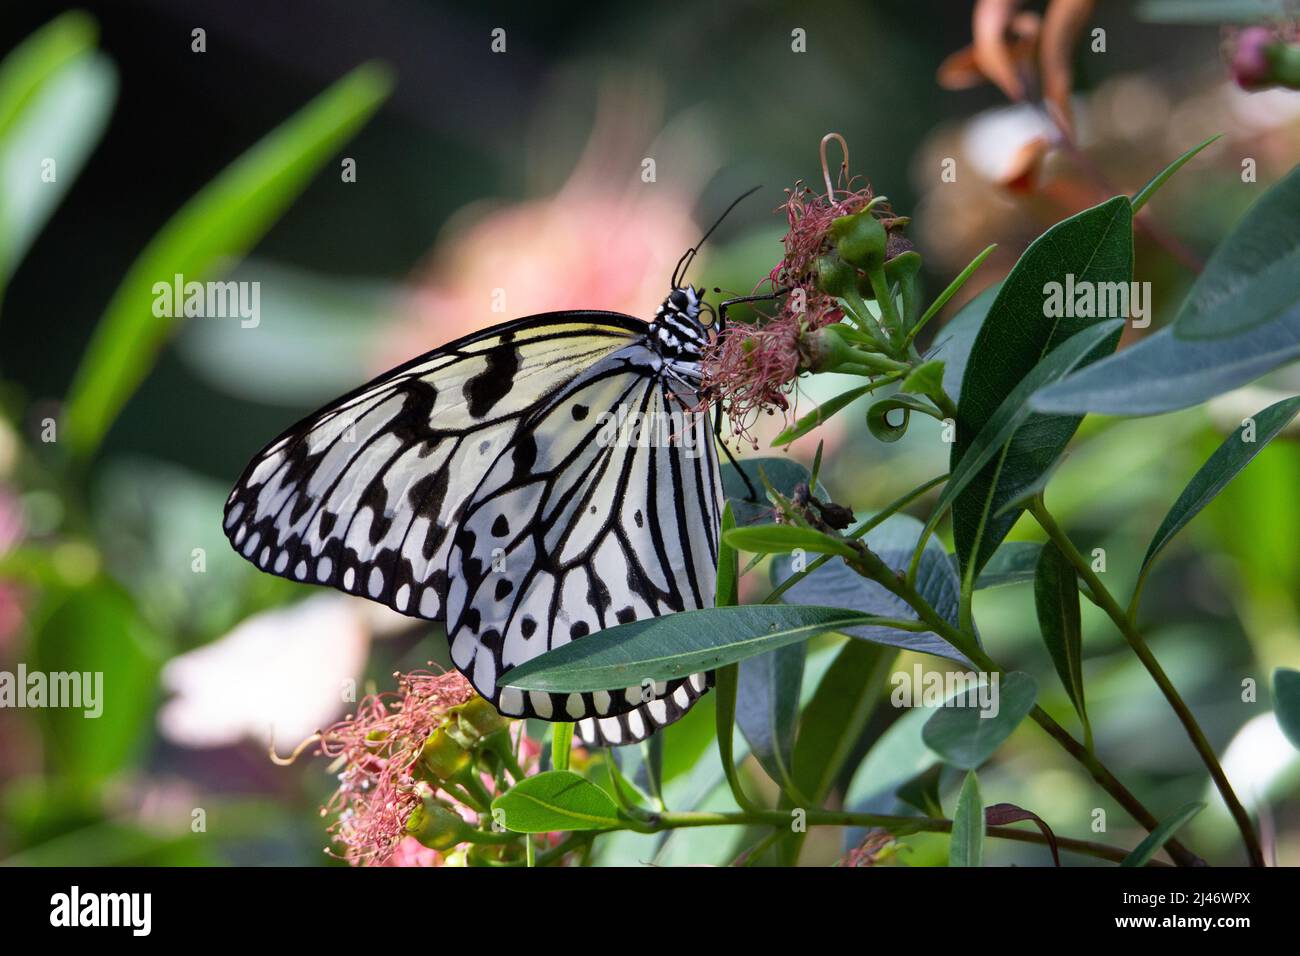 Large tree nymph (Idea leuconoe) large tree nymph butterfly with wings closed feeding on pale pink tropical flowers Stock Photo